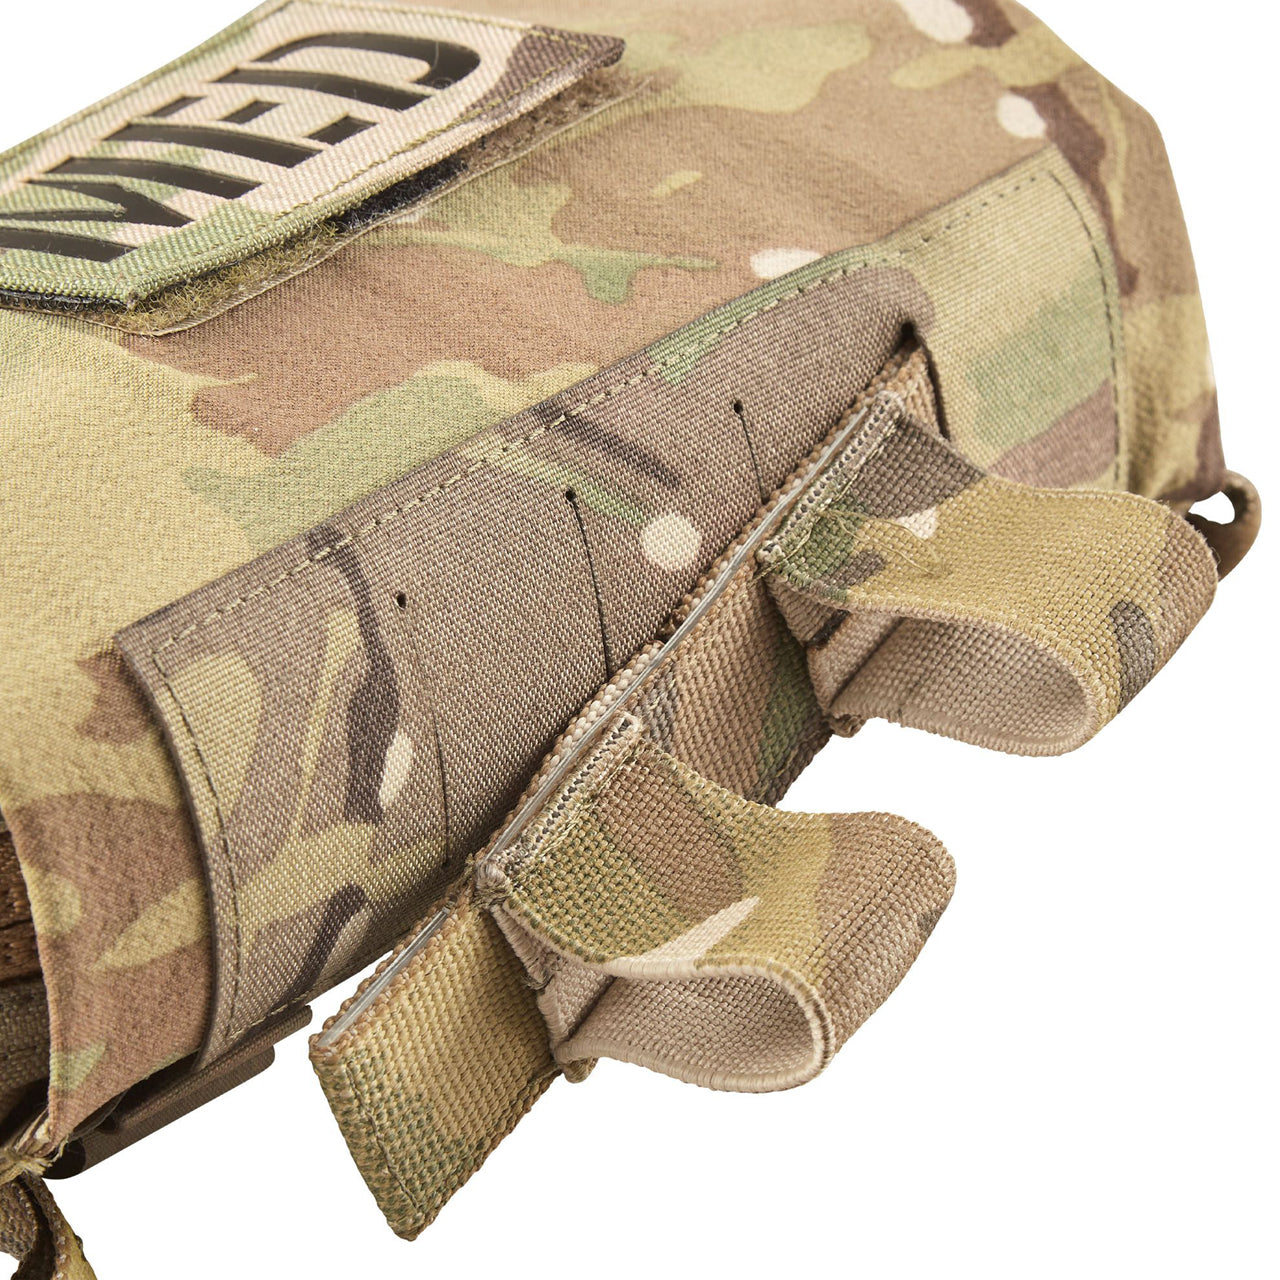 The PLATATAC Tear Away Med Pouch Pull Out Adaptor has been designed to turn your TAMPH (sold separately) from being a side release buckle and Velcro-secured Med Pouch into a side pull Med Pouch so your battle buddy can get your IFAK out quicker and with less hassle. www.defenceqstore.com.au